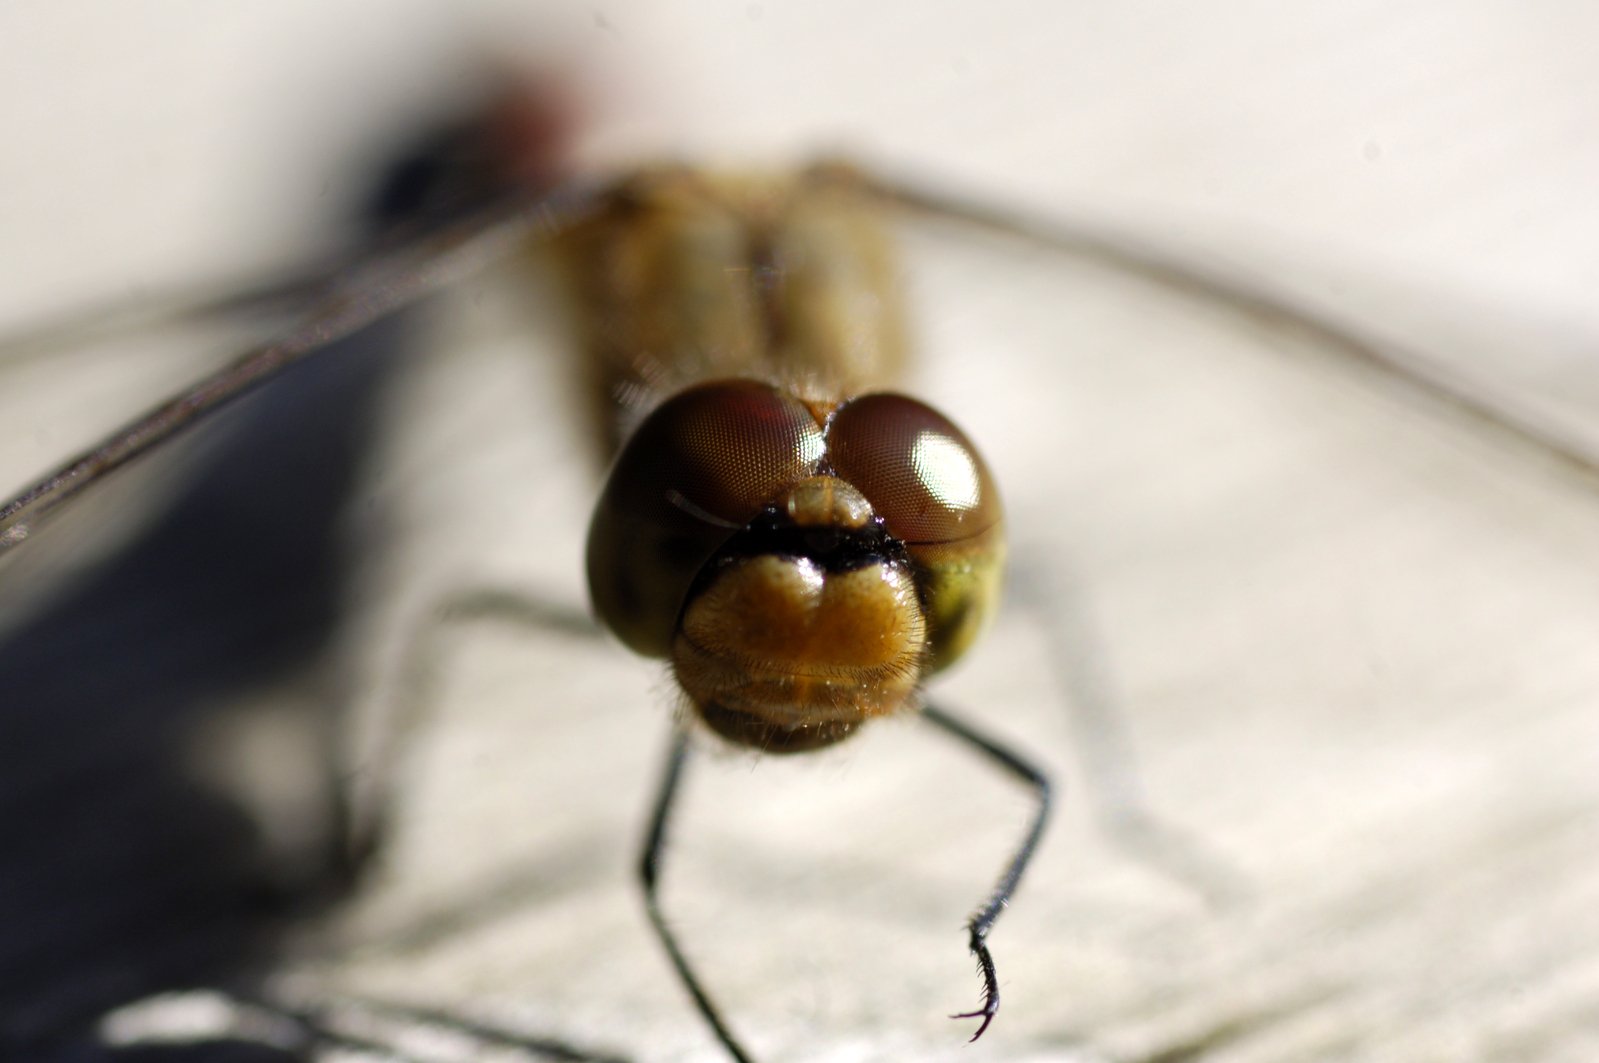 a insect sits on the edge of a glass plate